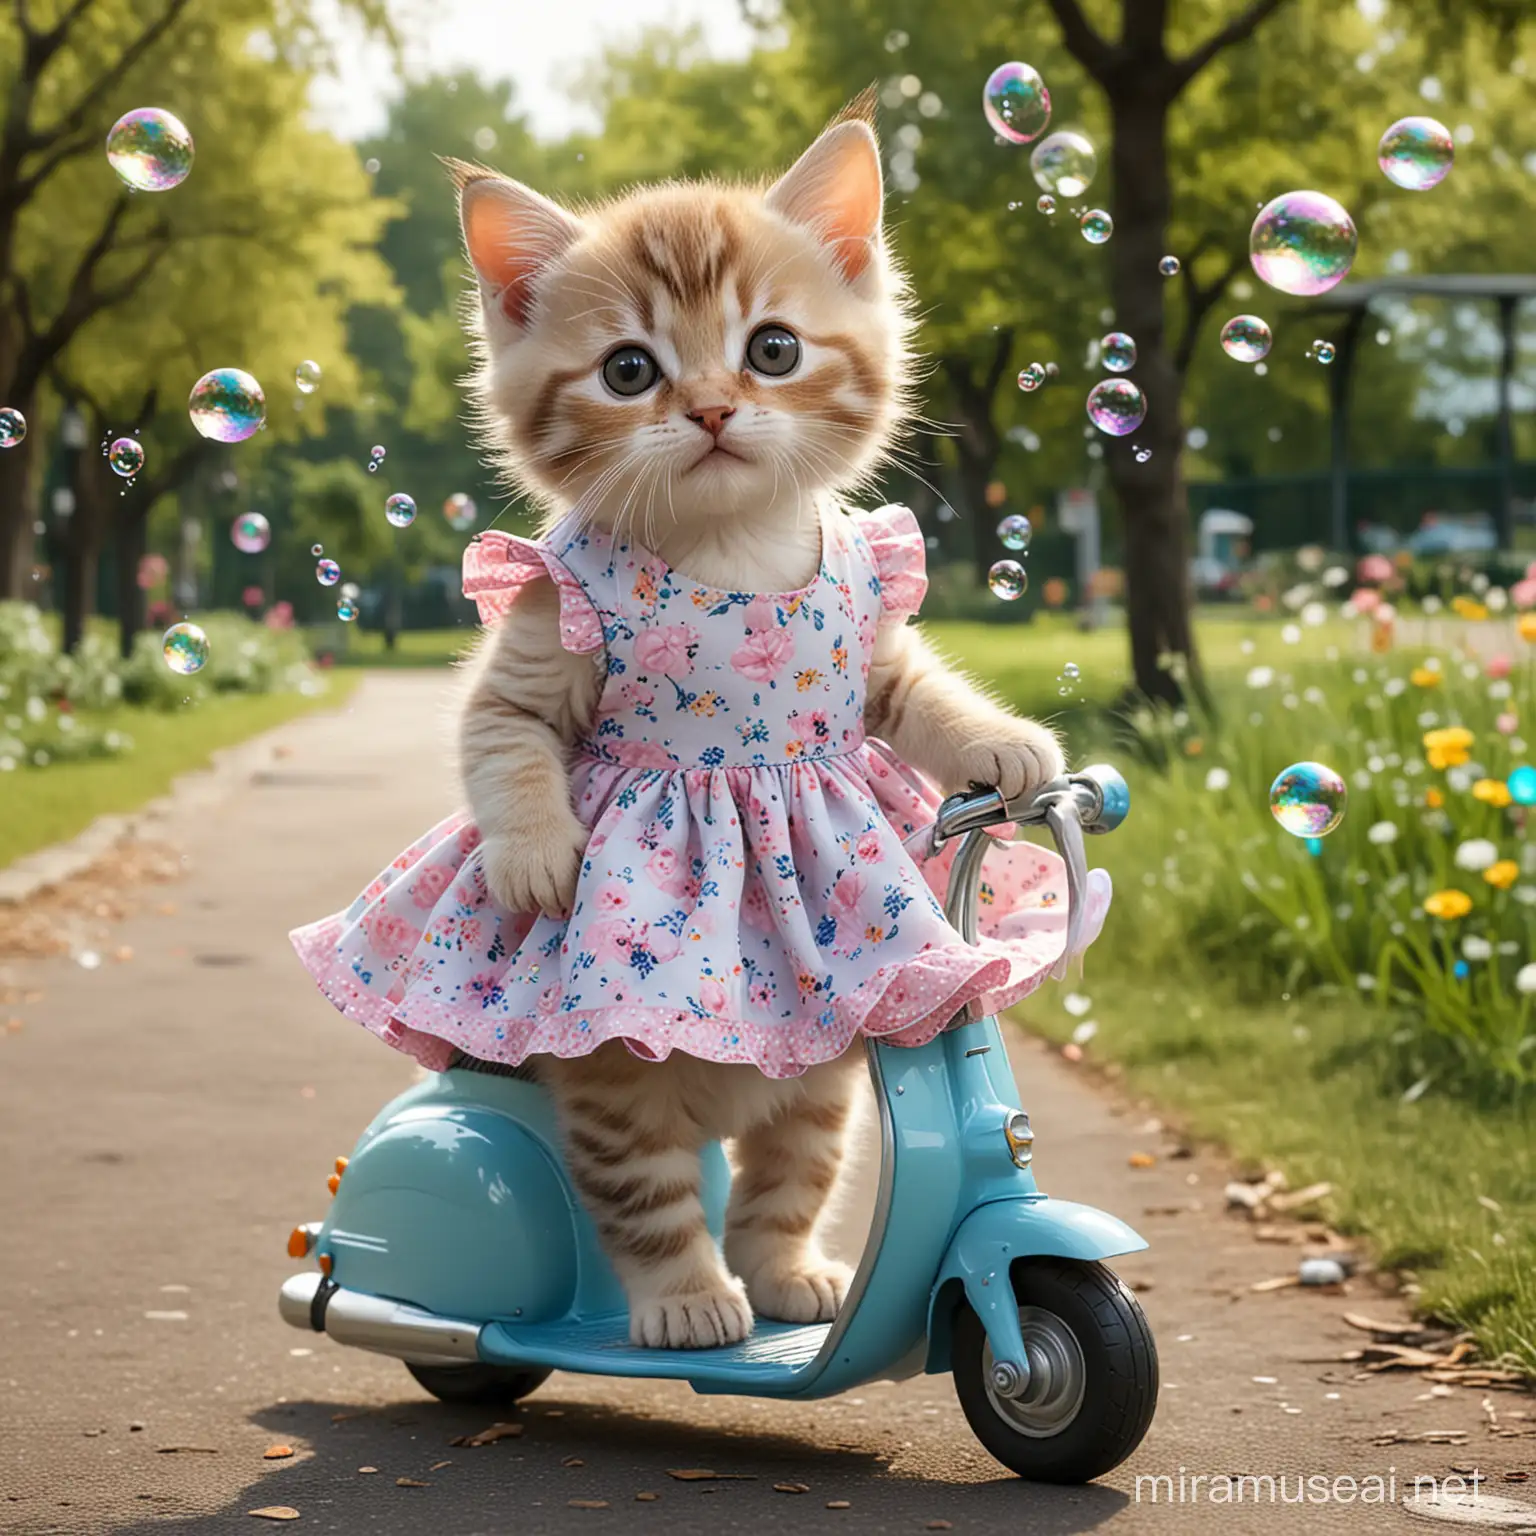 Adorable Kitten in Dress Riding Scooter and Watching Bubbles in Park